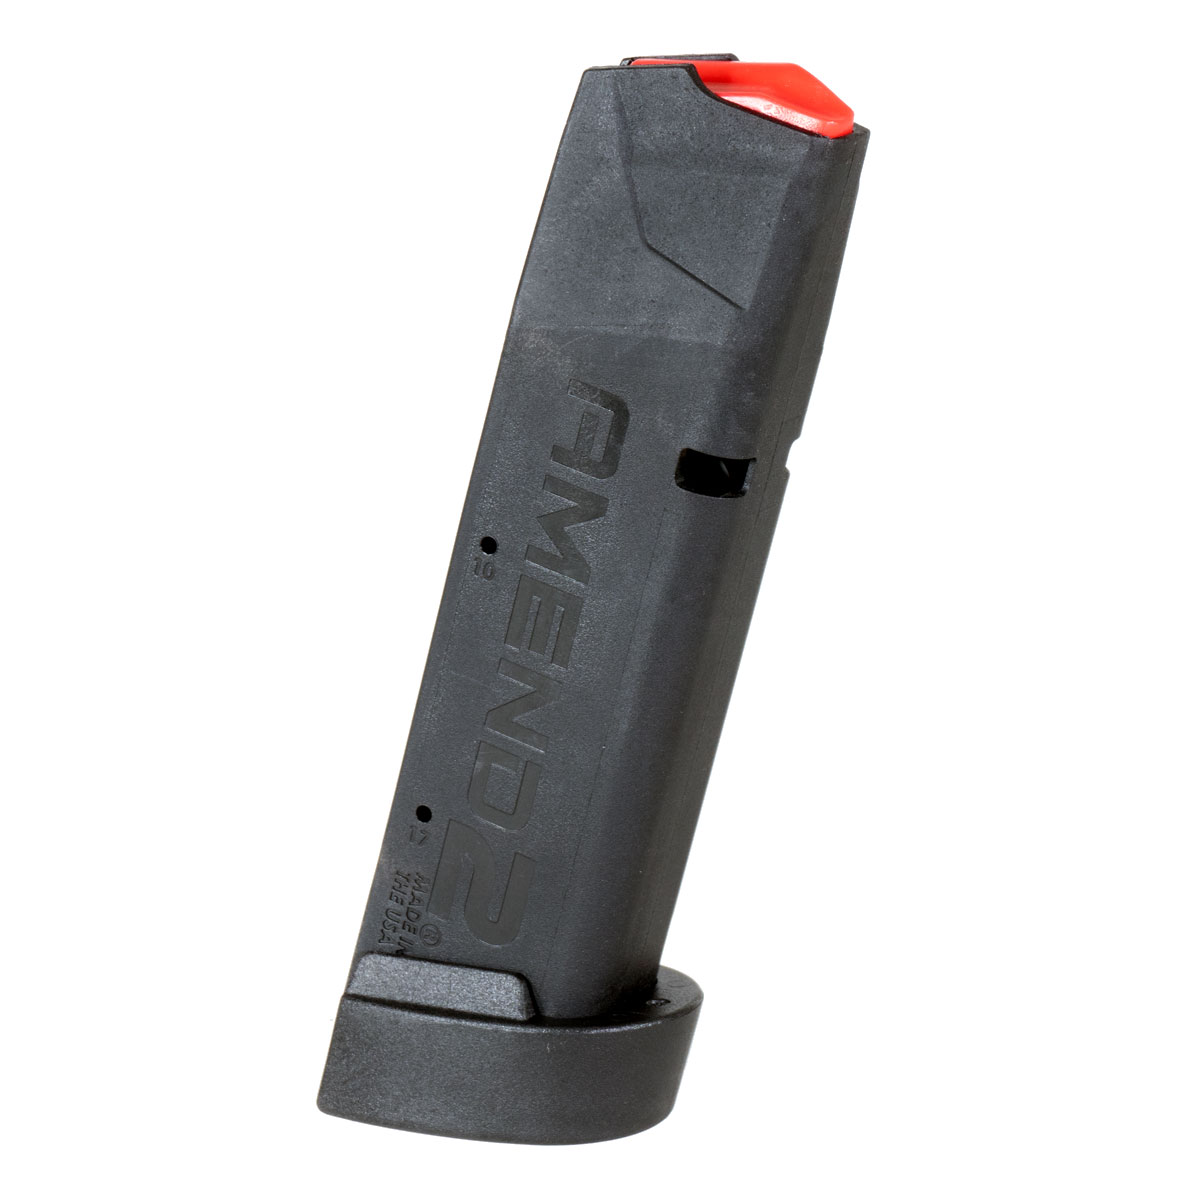 Amend2 A2-320 9mm 17-Round Black Mod-2 Magazine designed for use in Sig Sauer® P320